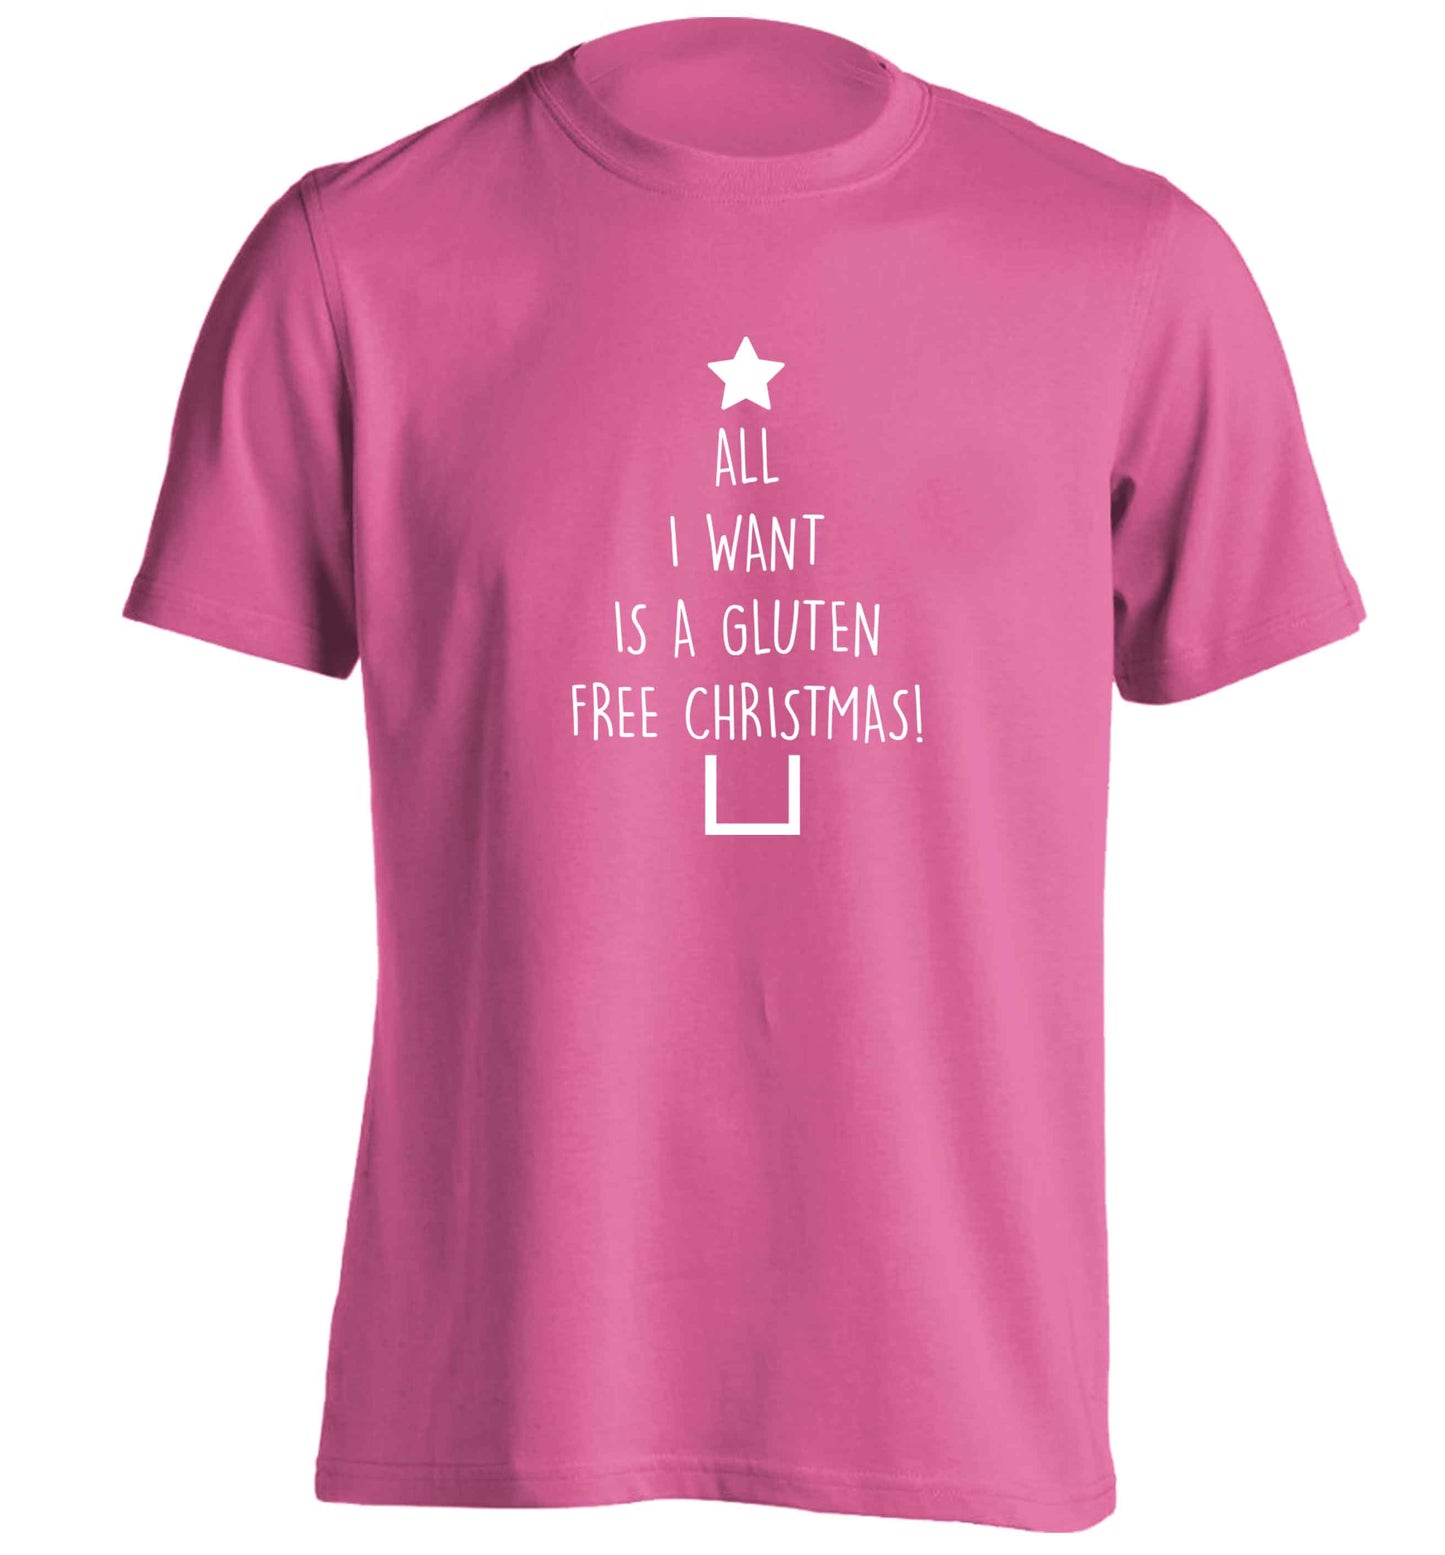 All I want is a gluten free Christmas adults unisex pink Tshirt 2XL